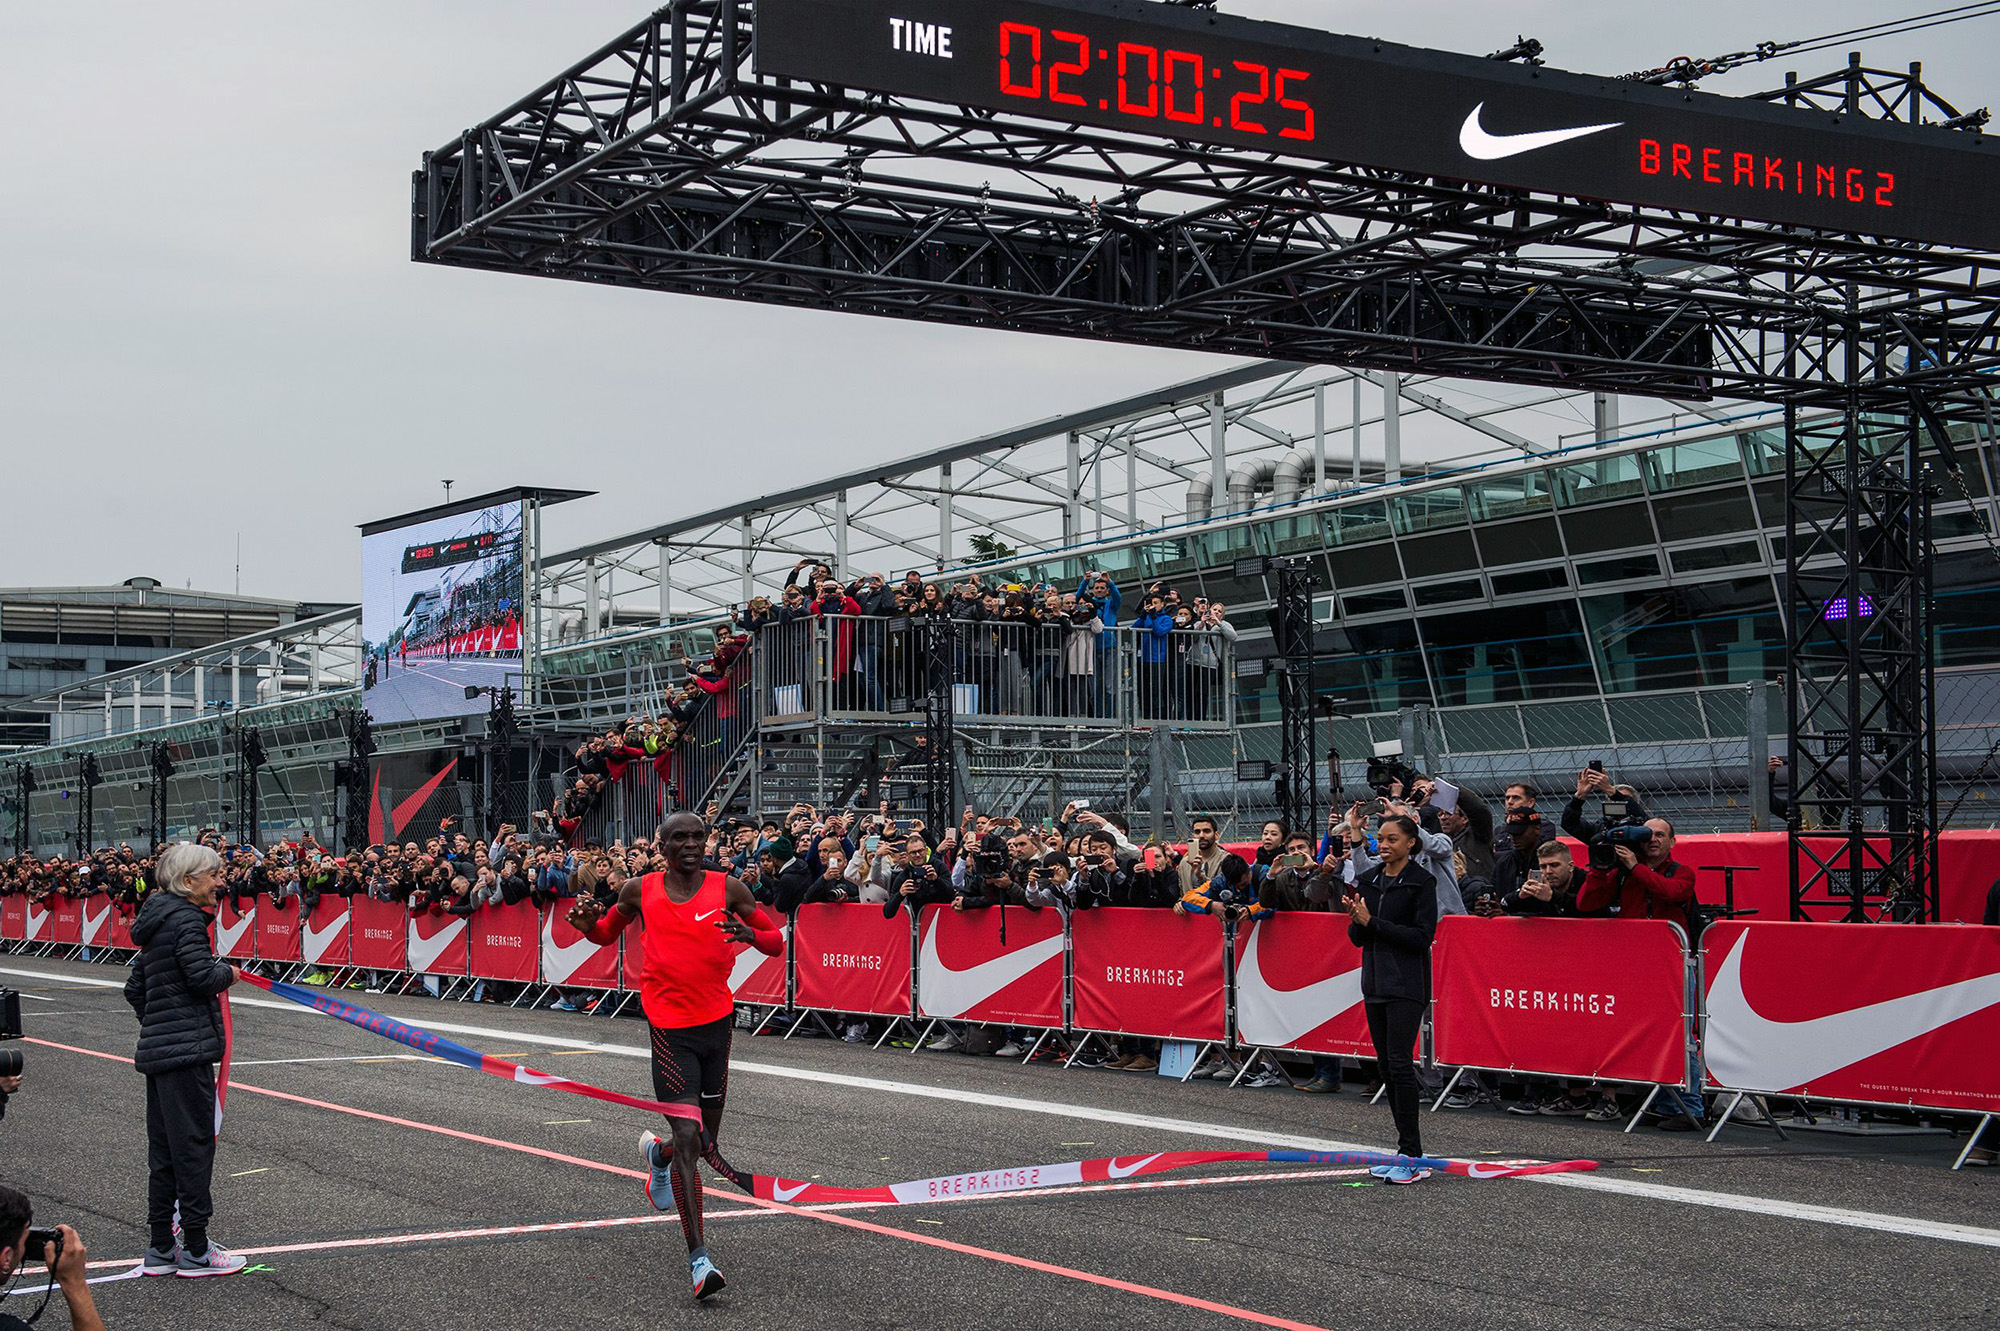 Eliot Kipchoge crossing the finish line in Monza Italy